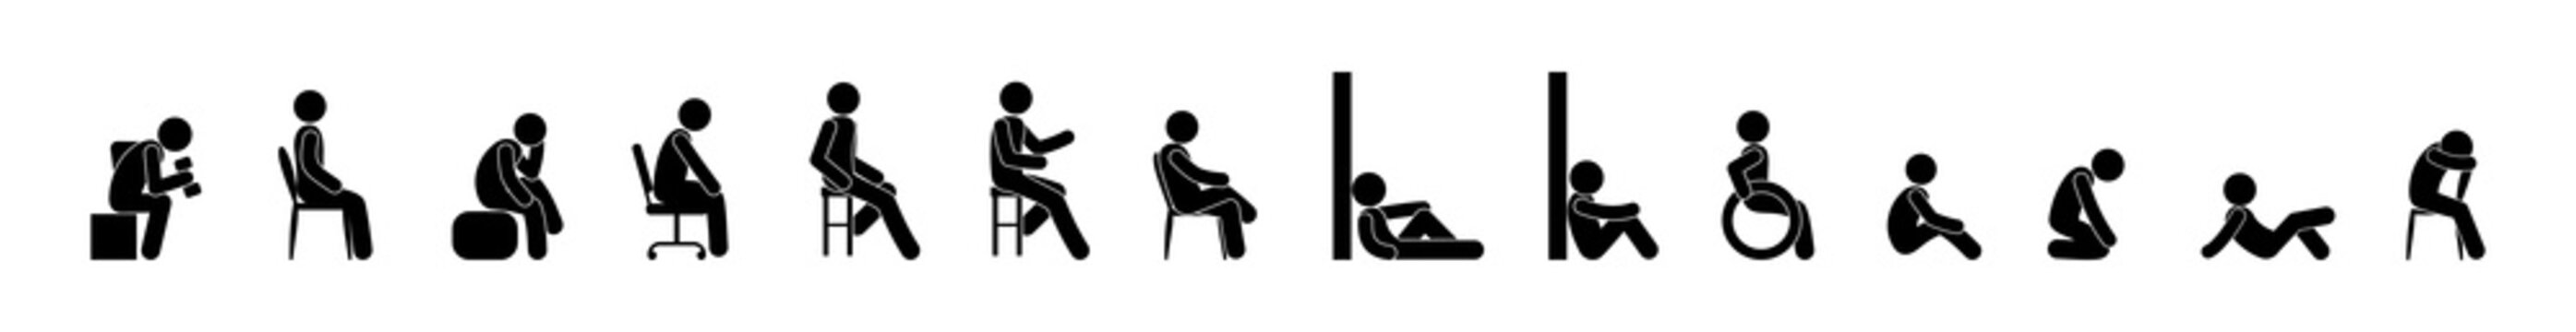 man sitting, various poses of people, isolated human silhouettes, stick figure icon, sit down illustration